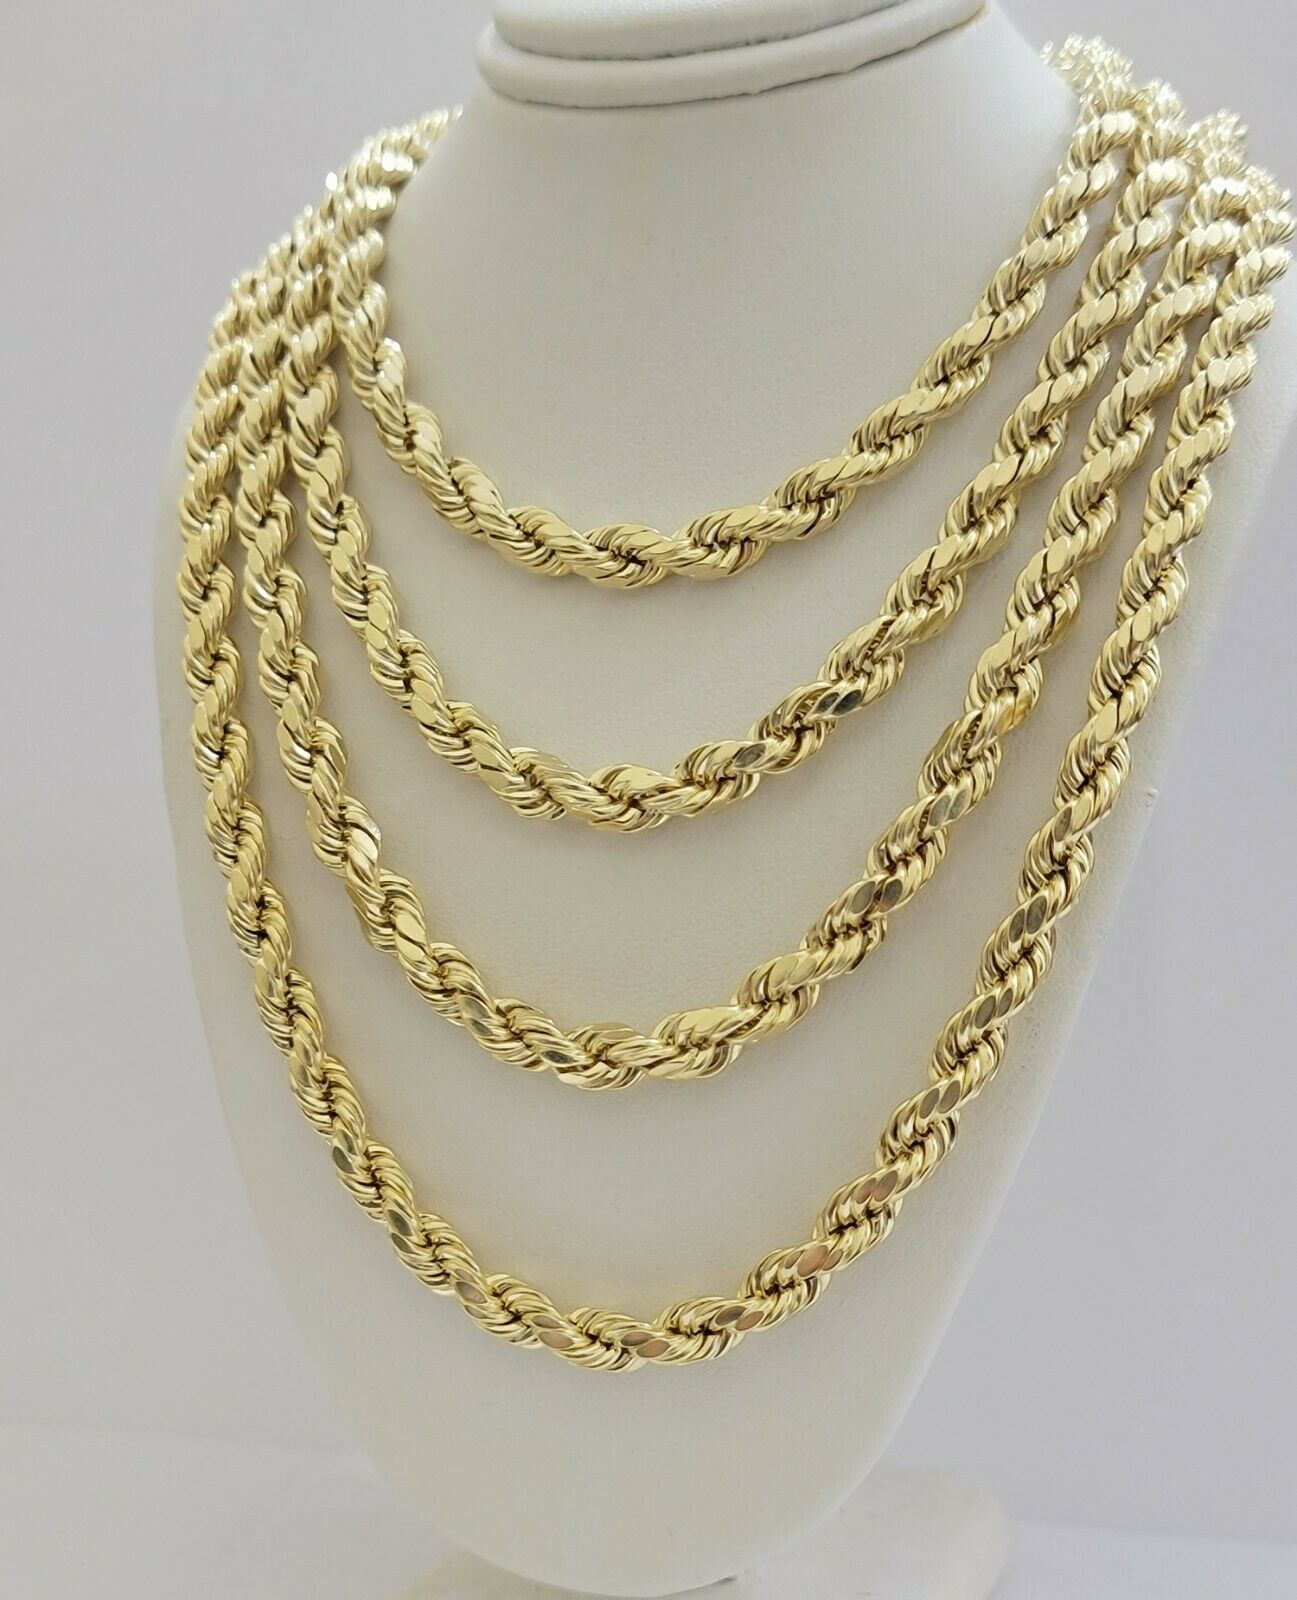 Real Gold 10K Rope Necklace Men' Chain 7mm 18-30 inch Yellow Gold Diamond Cuts 24 inch